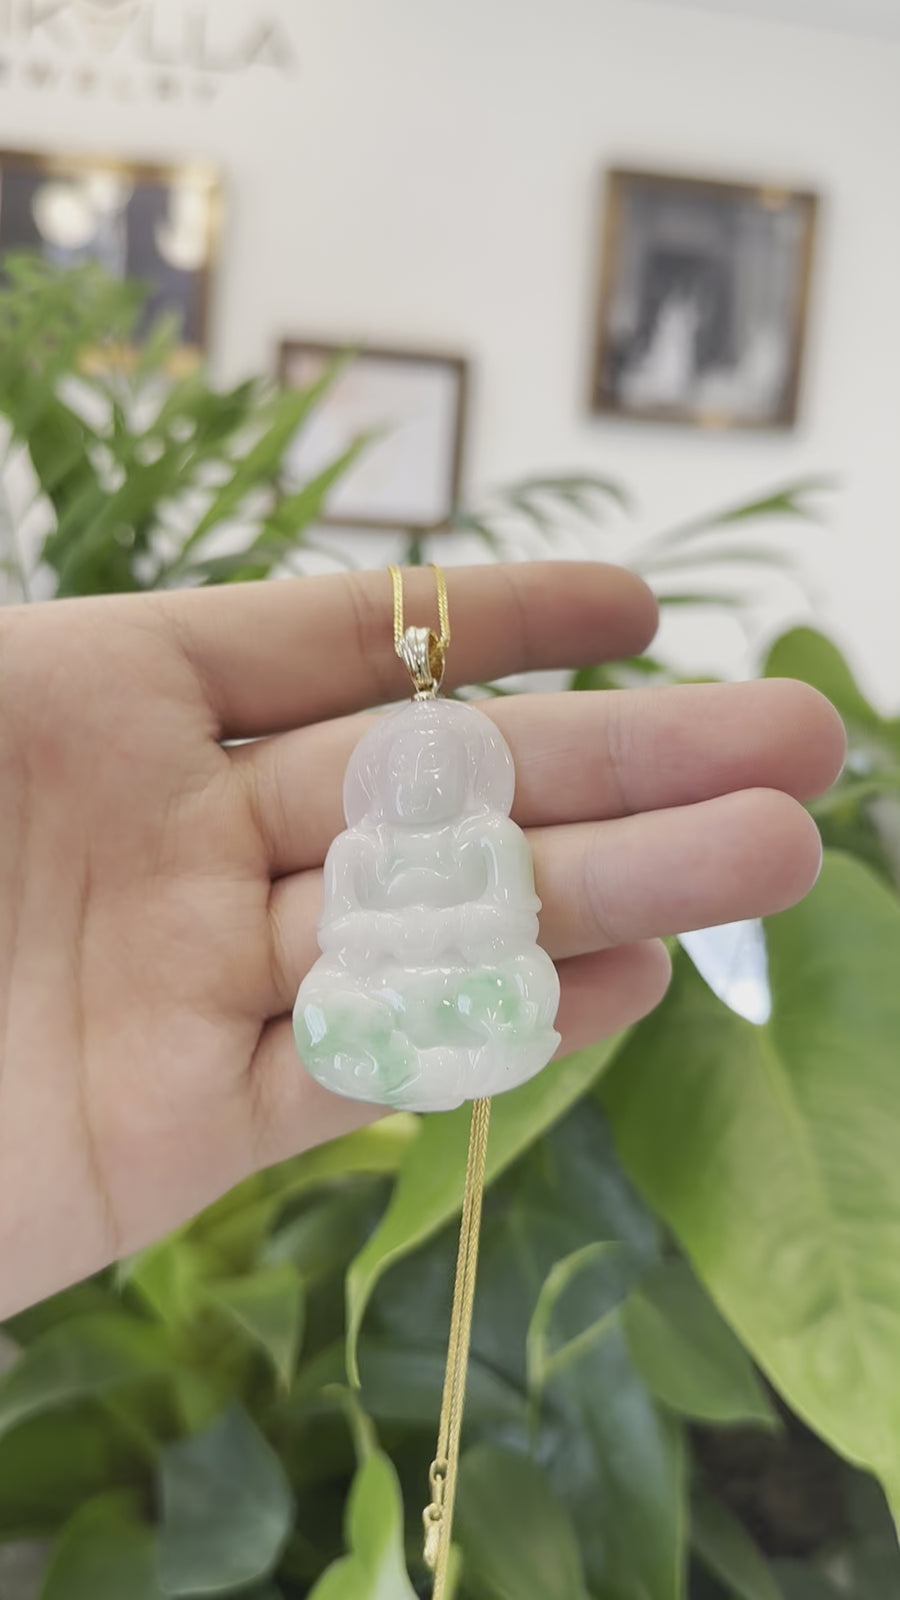 Goddess of Compassion" 14k Yellow Gold Genuine Burmese Jadeite Jade Guanyin Necklace With Good Luck Design